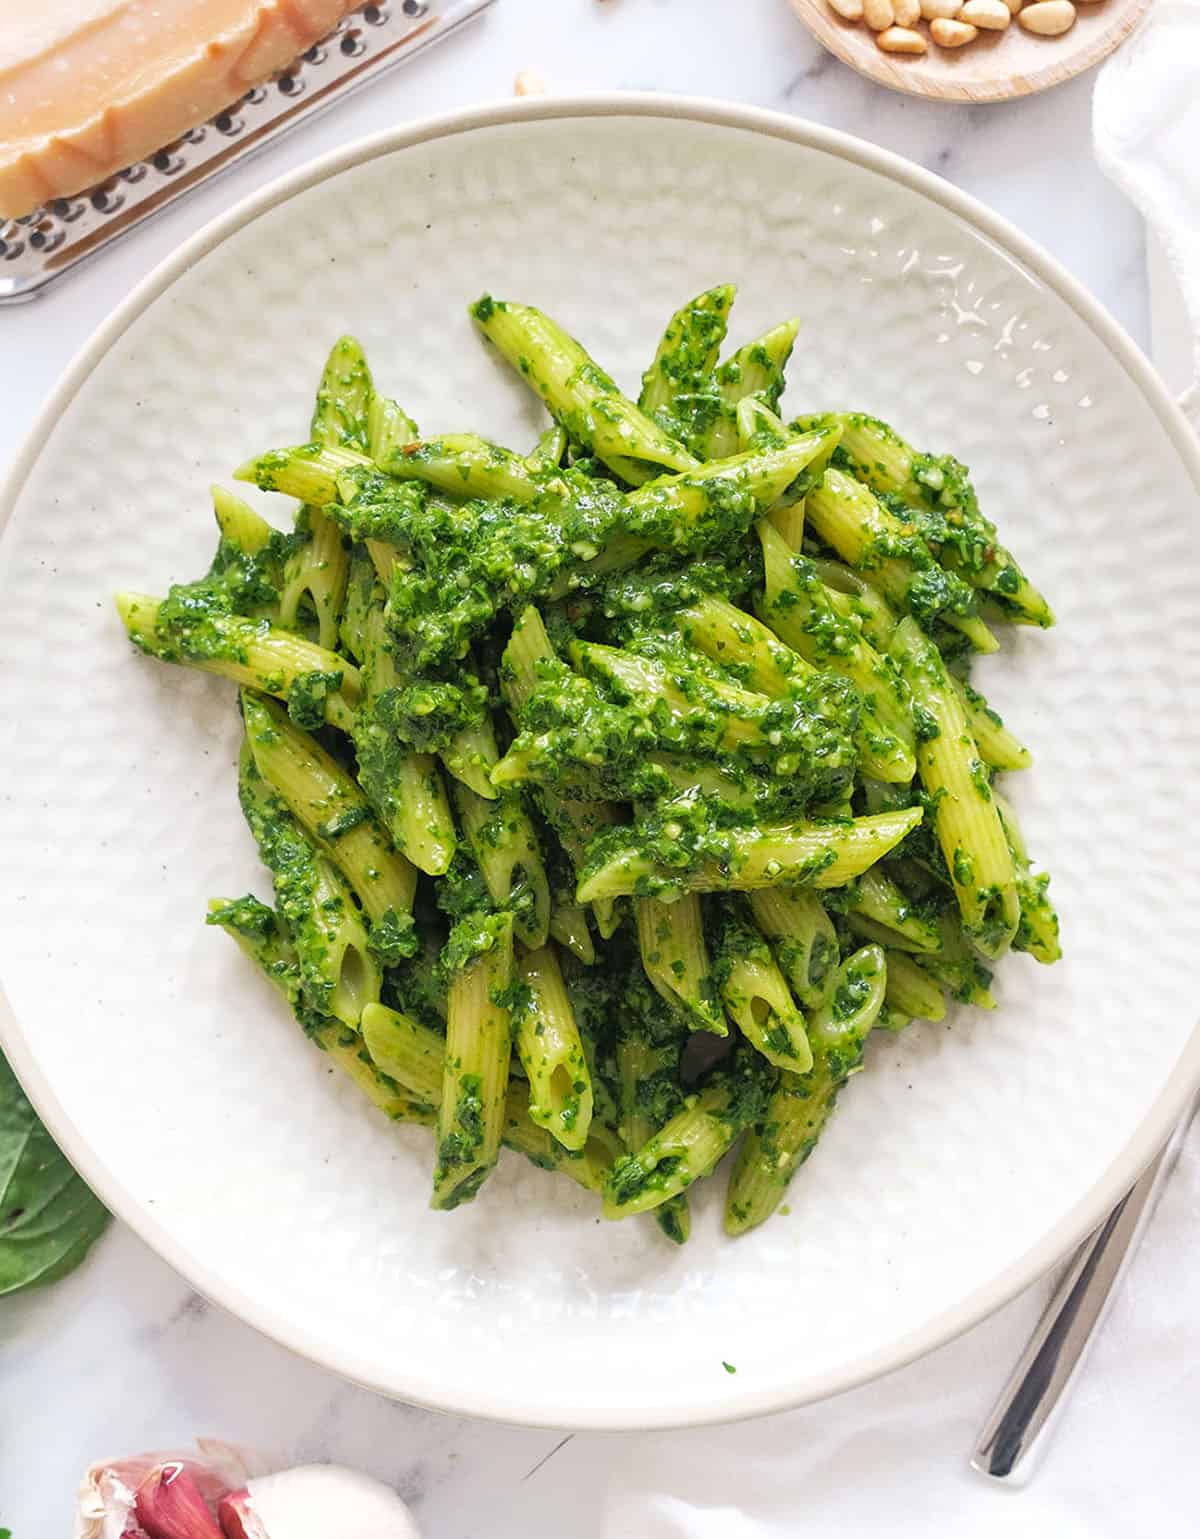 Top view of a white plate full of spinach pesto pasta.